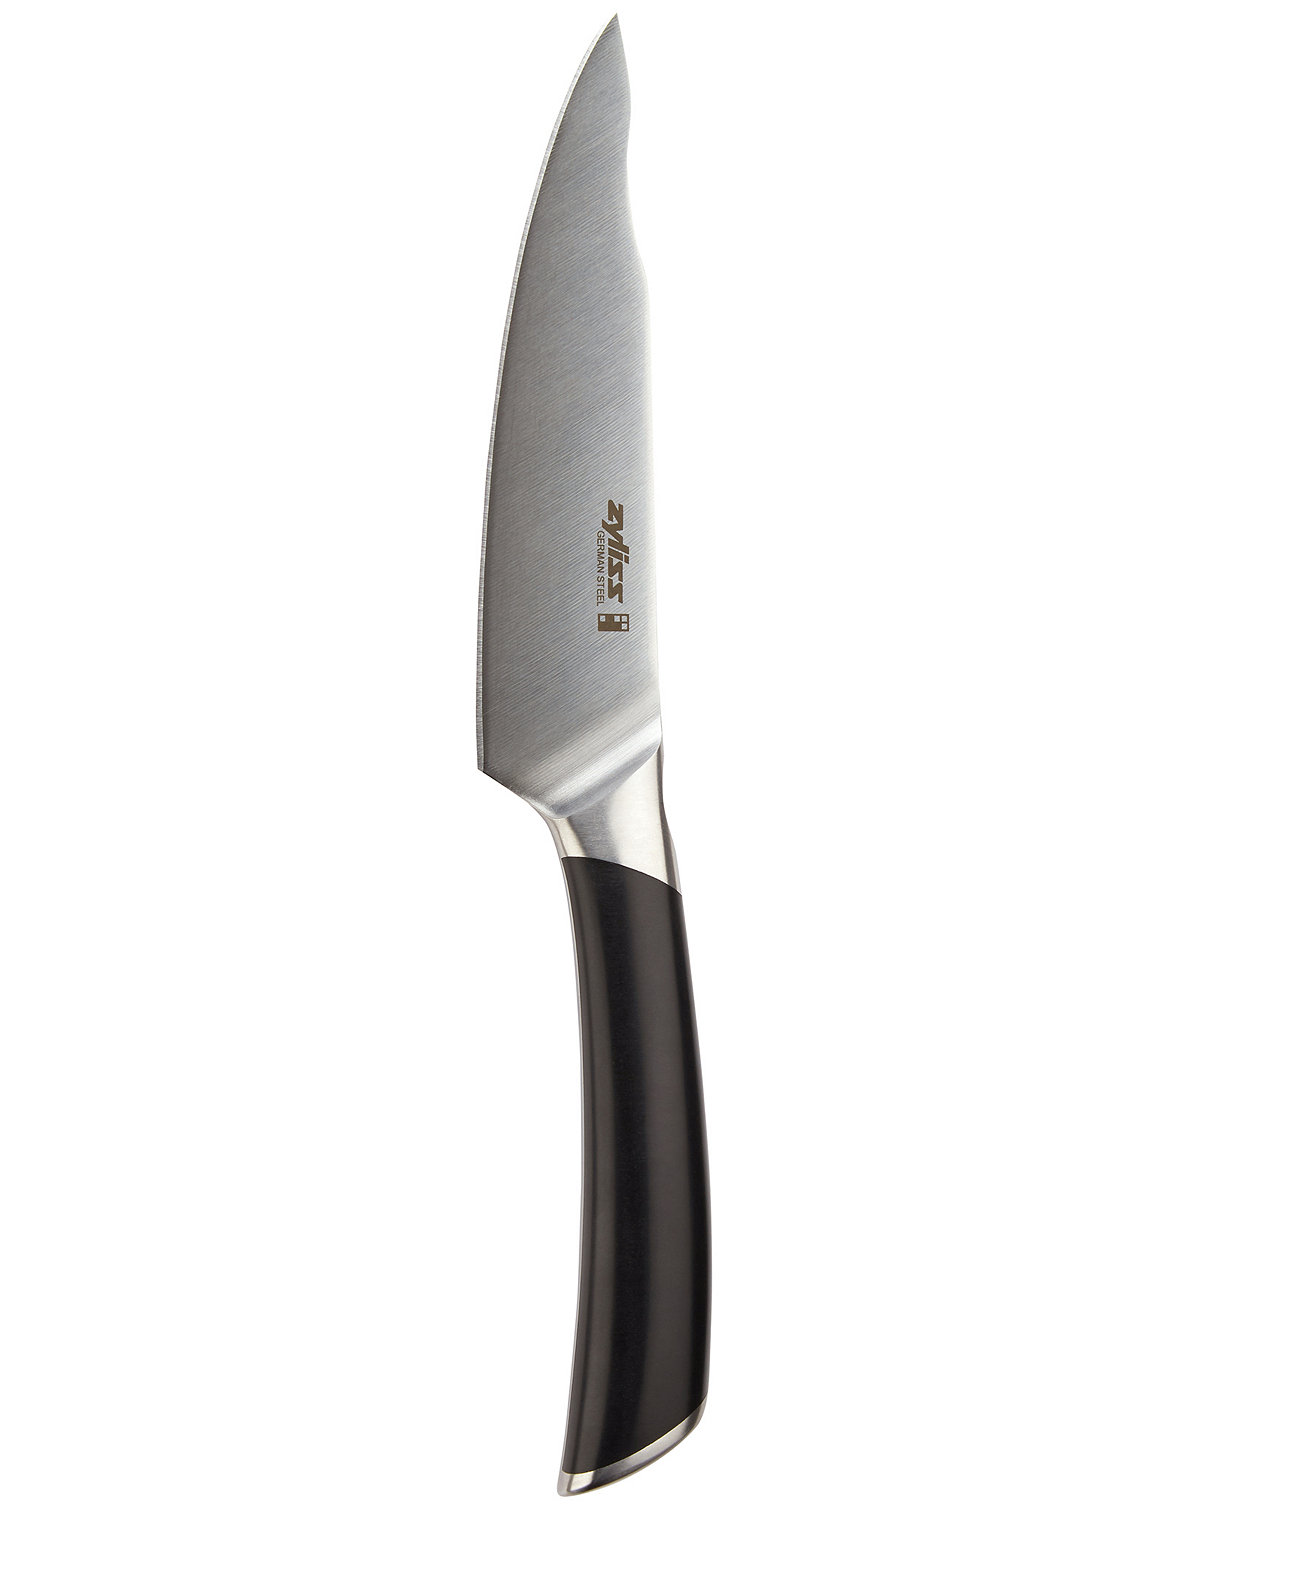 Comfort Pro Stainless Steel Utility Knife 5.5" Zyliss